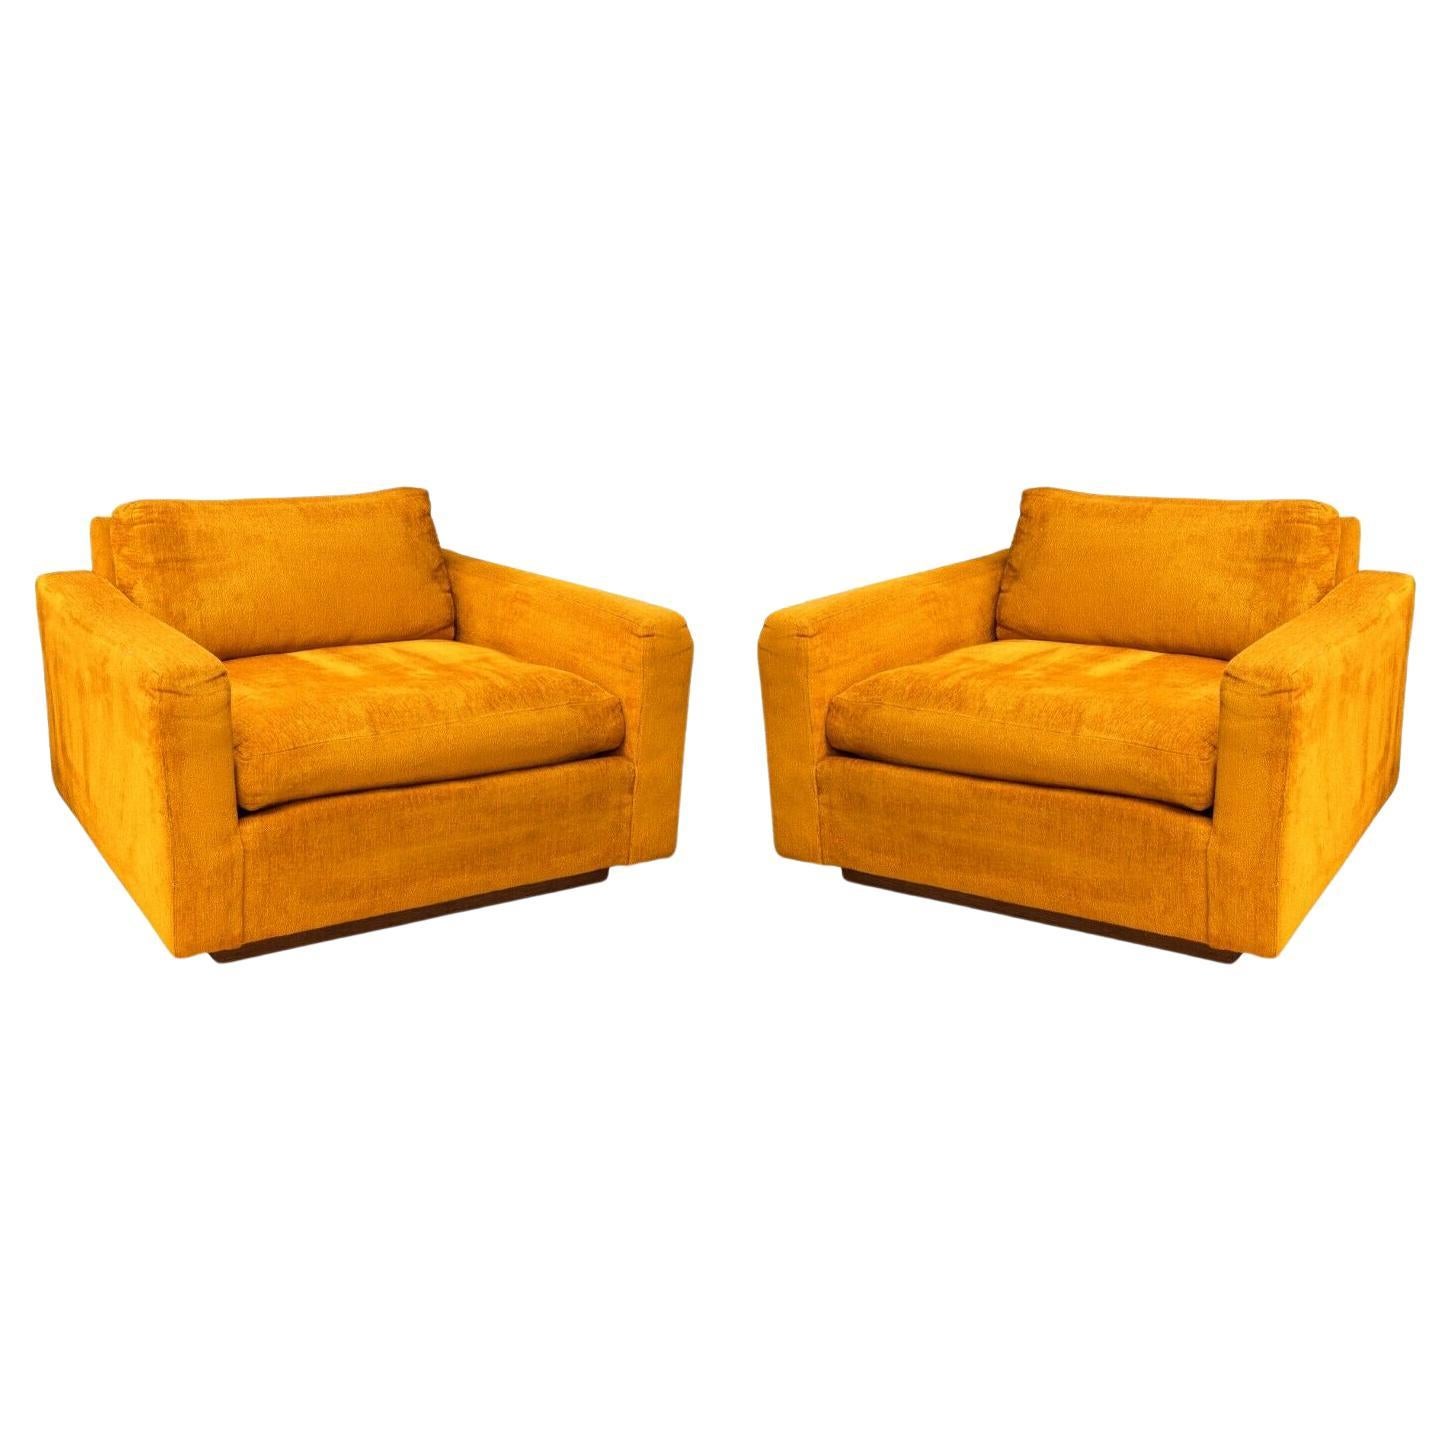 Pair of Milo Baughman for Thayer Coggin Orange Cube Lounge Chairs on Wood Base